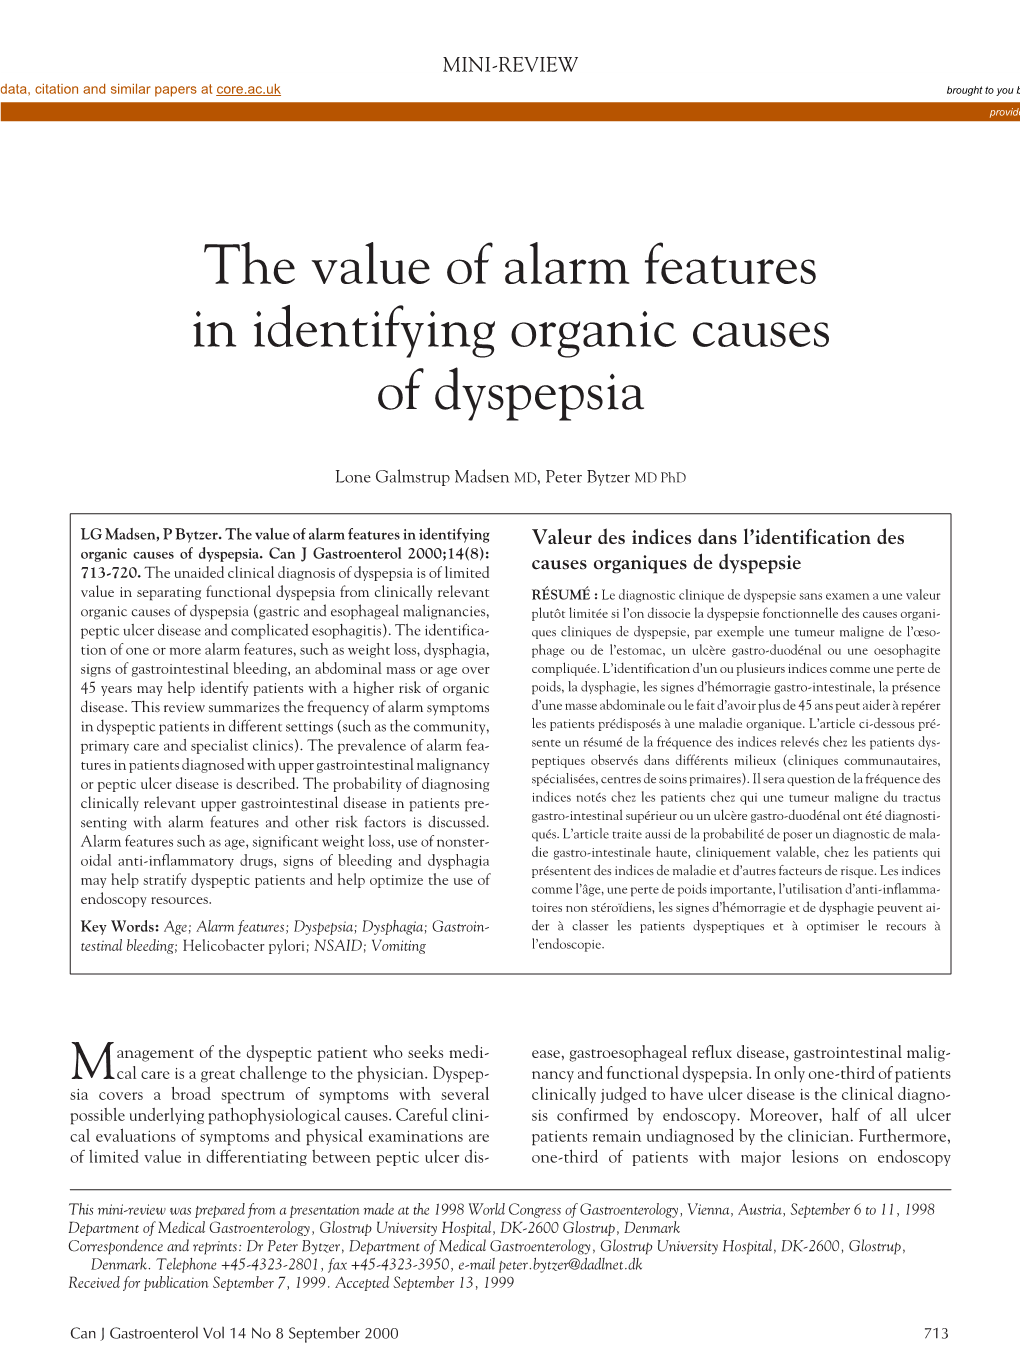 The Value of Alarm Features in Identifying Organic Causes